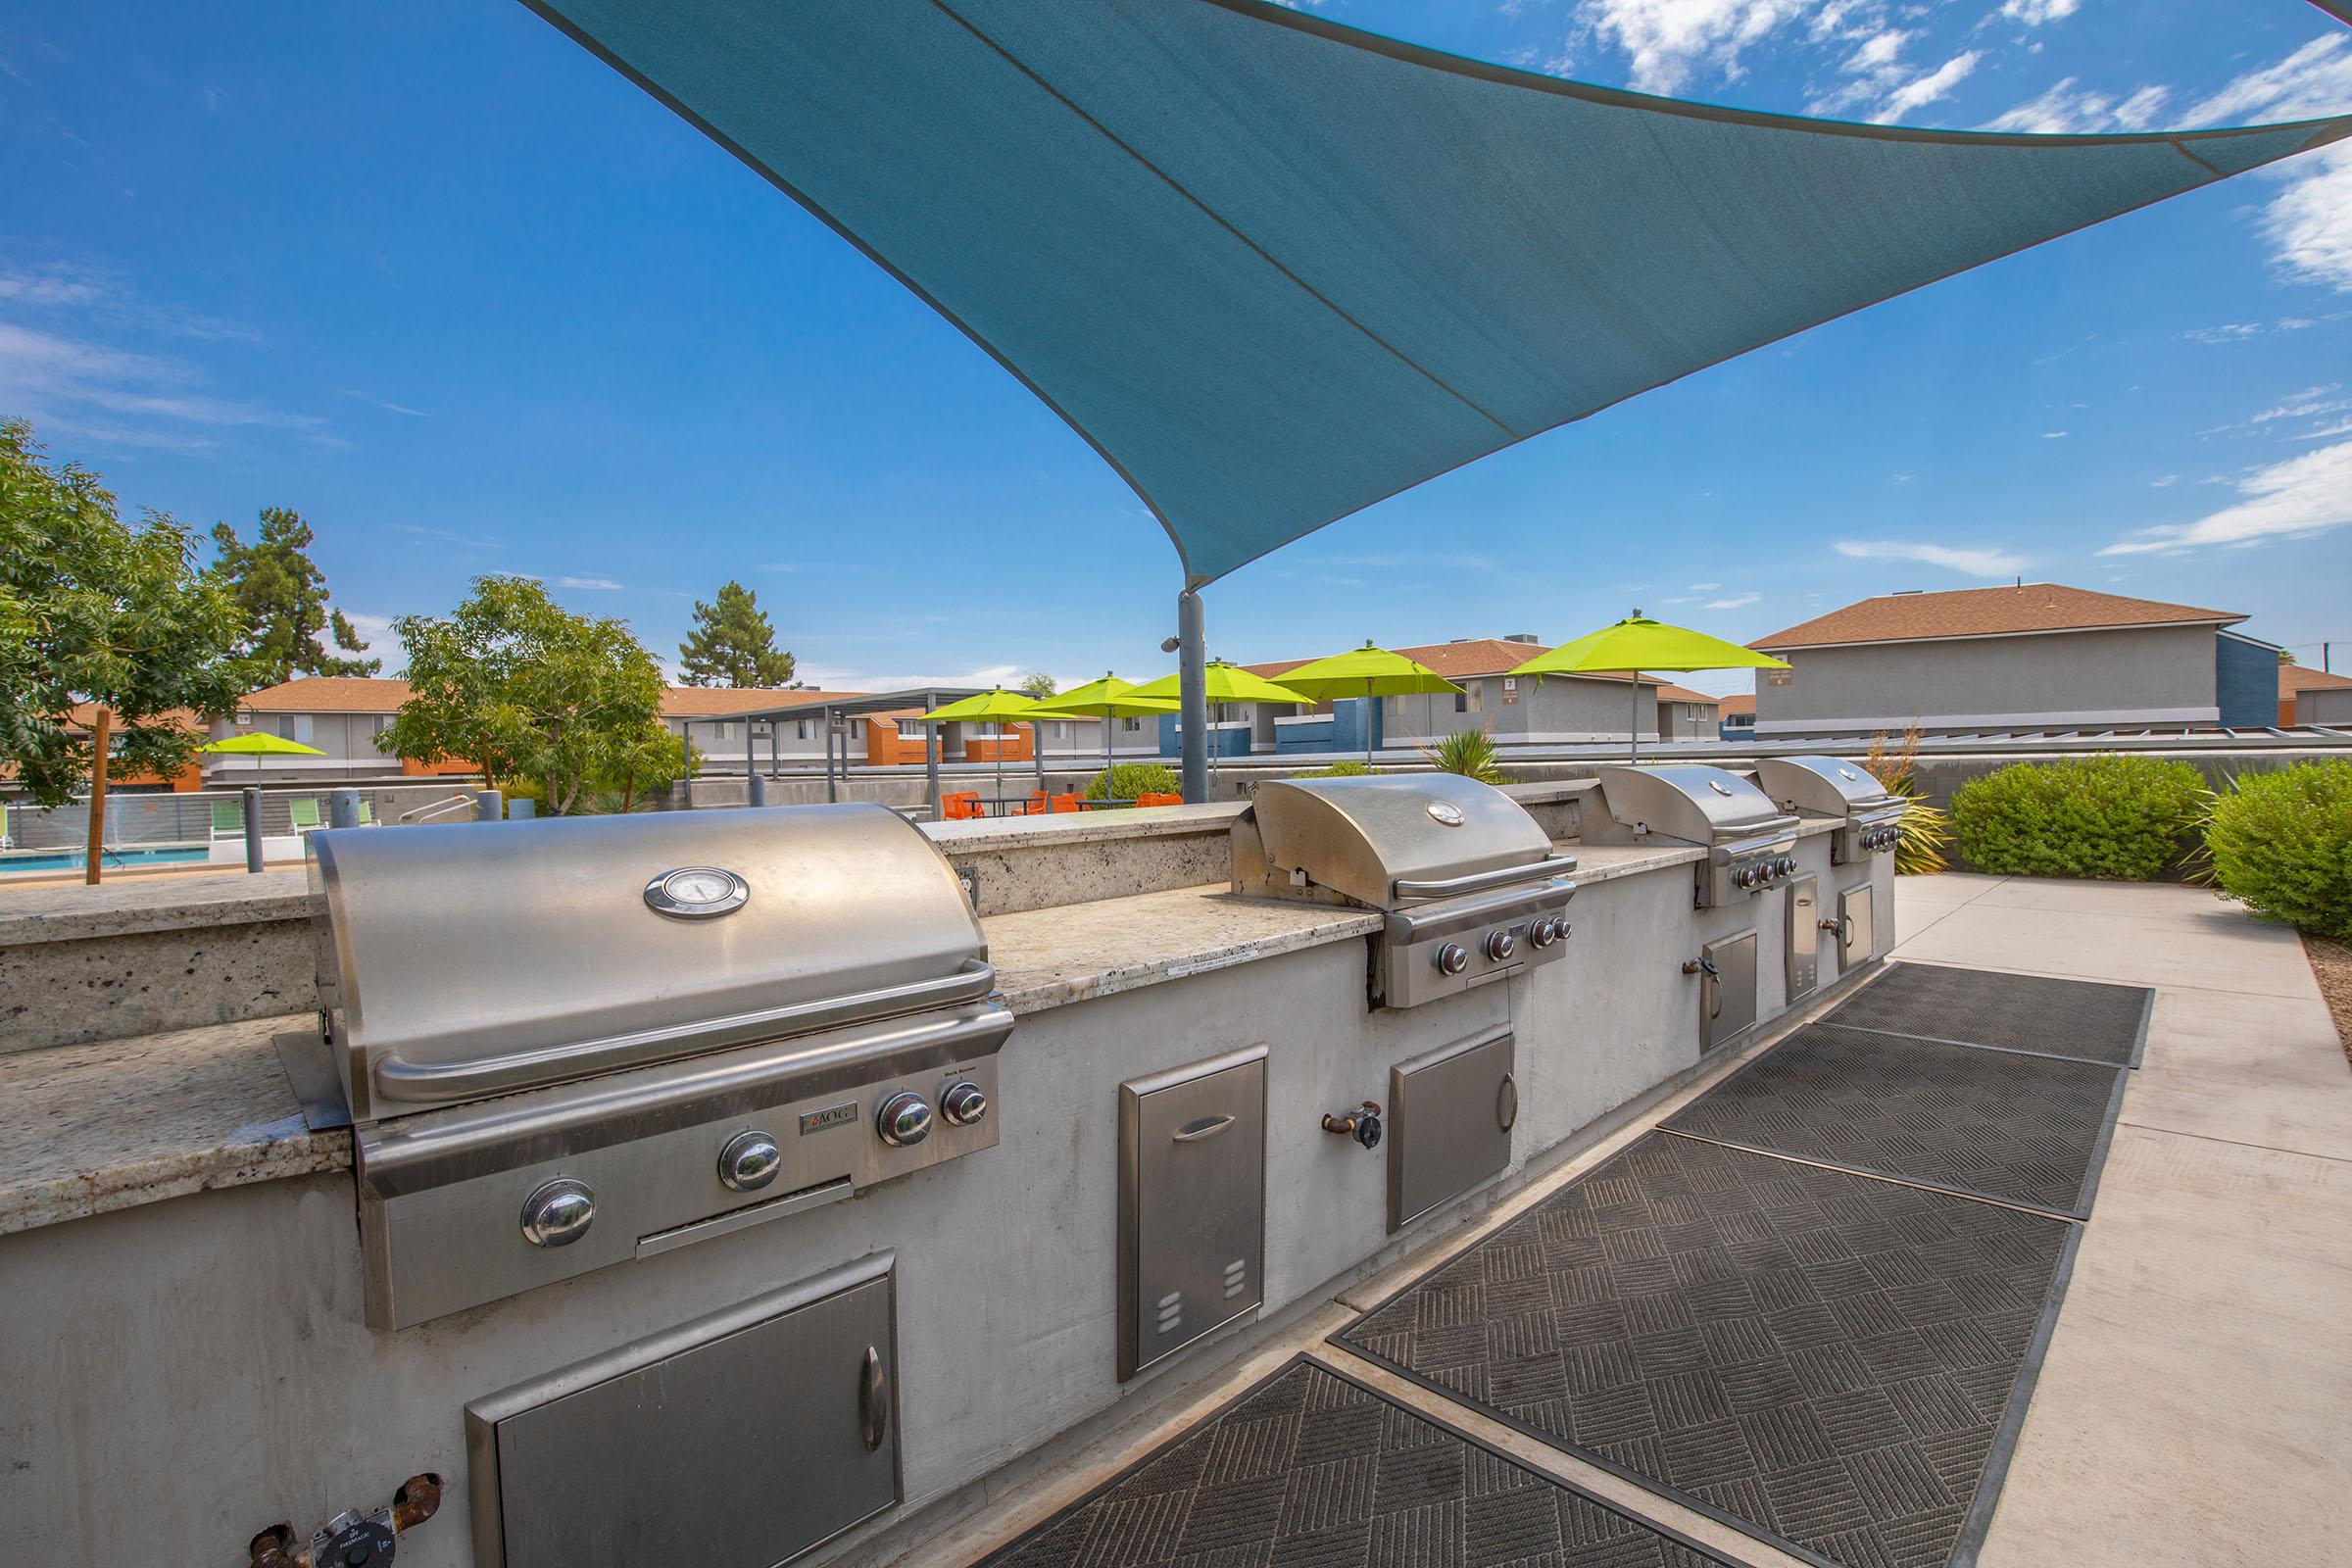 Outdoor apartment complex community patio bar top with 4 stainless steel grills and sunshade cover